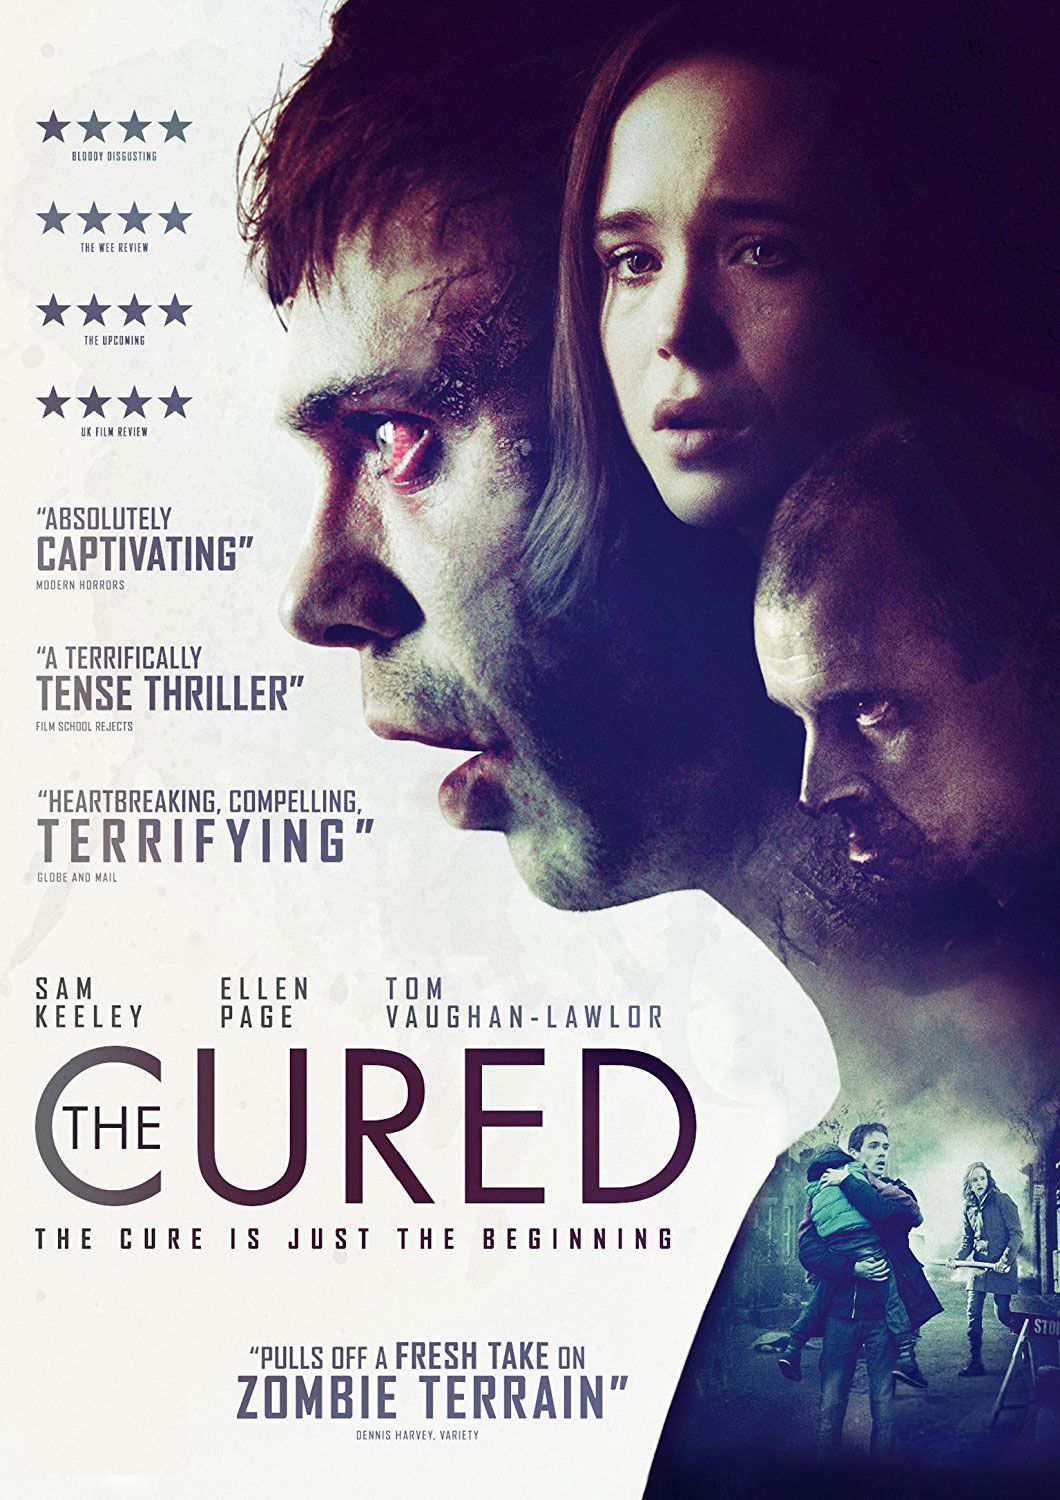 The Cured Film Poster